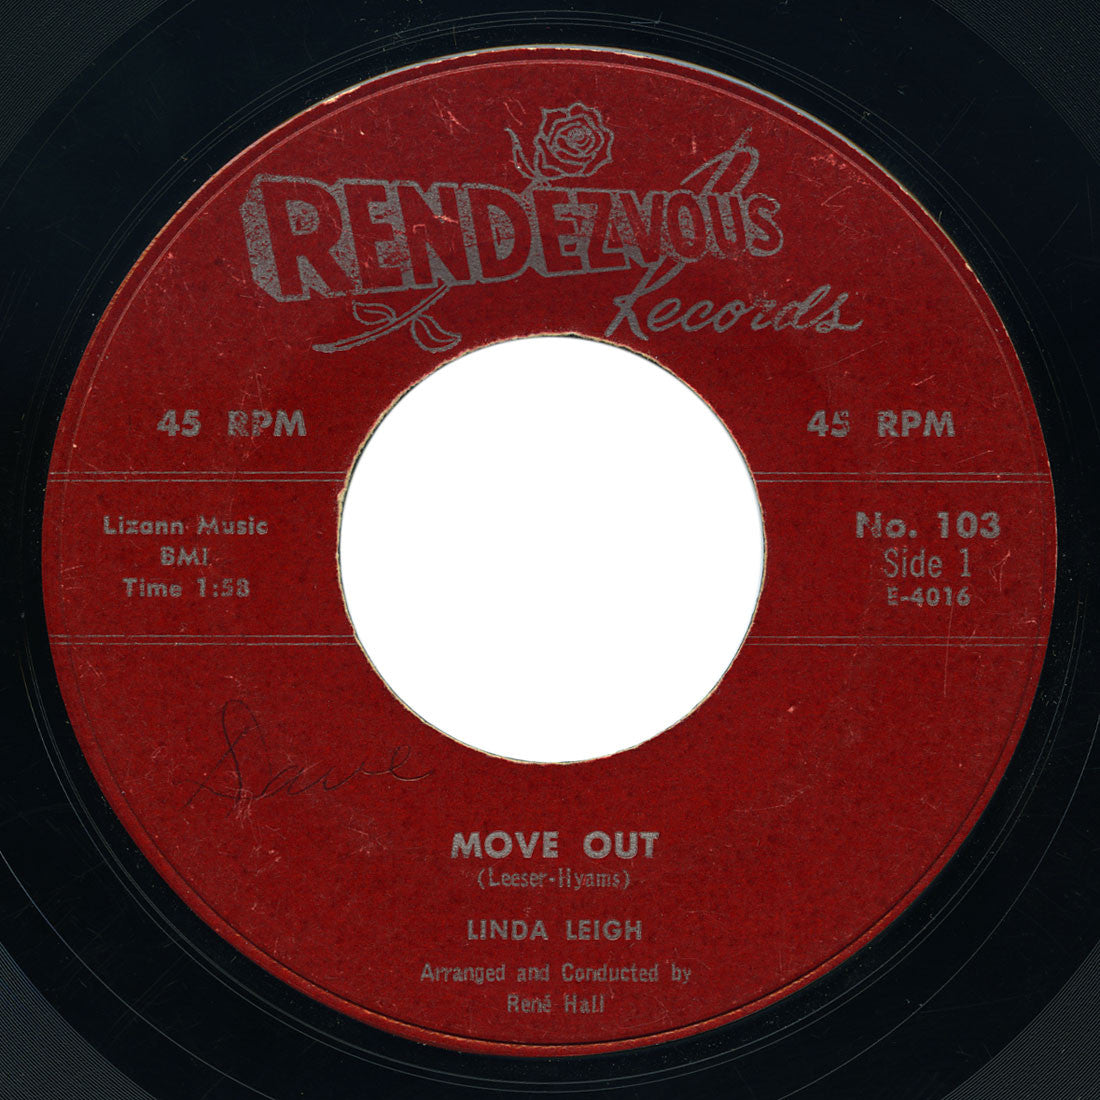 Linda Leigh - Move Out / It’s Real - Rendezvous